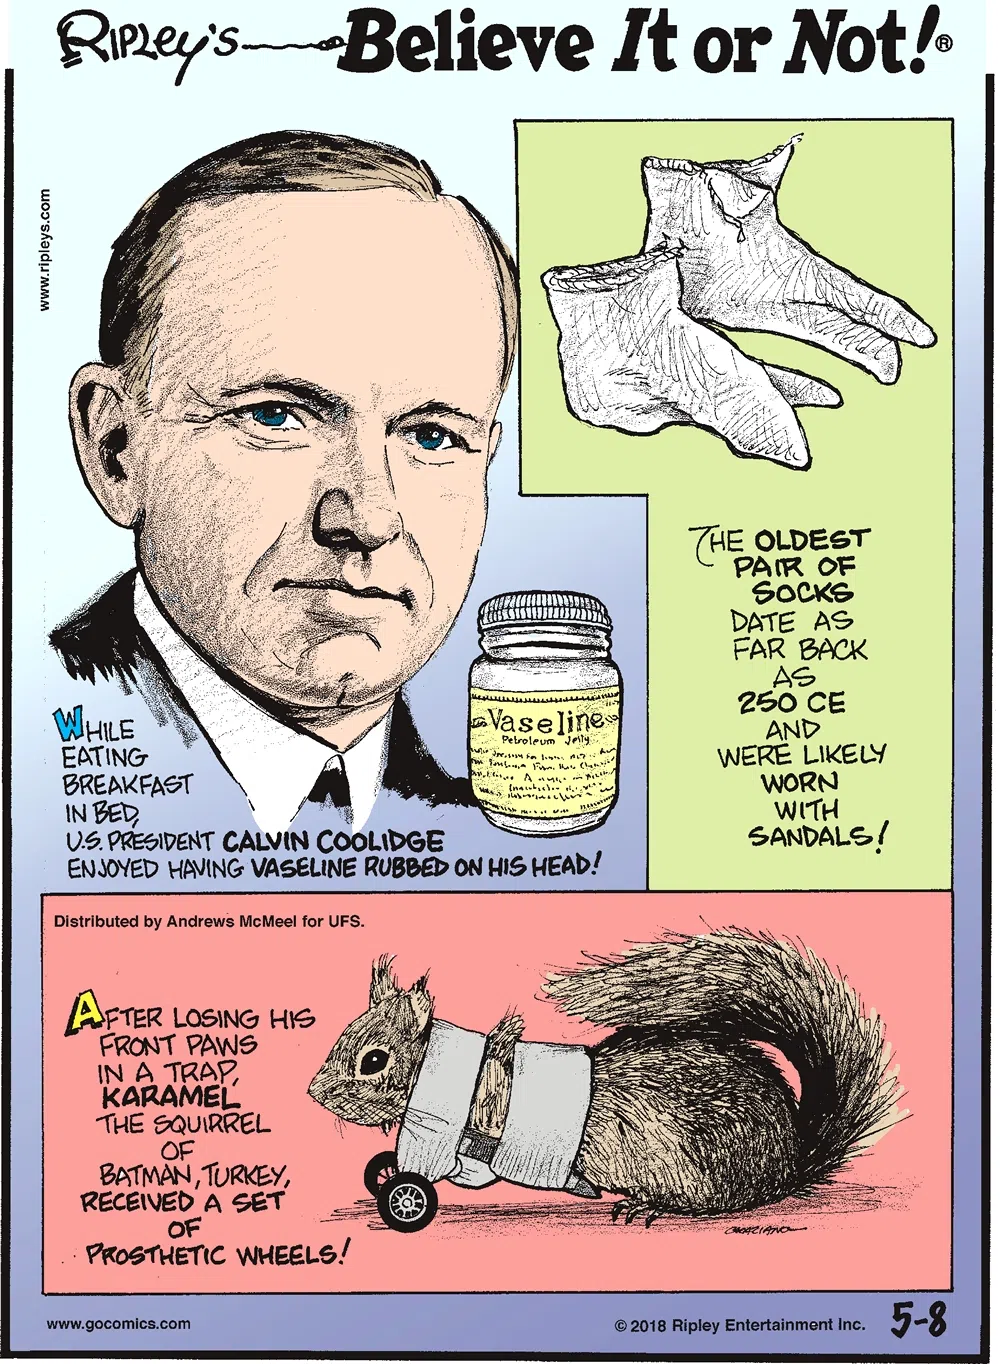 While eating breakfast in bed, U.S. President Calvin Coolidge enjoyed having Vaseline rubbed on his head!-------------------- The oldest pair of socks date as far back as 250 CE and were likely worn with sandals!-------------------- After losing his front paws in a trap, Karamel the Squirrel of Batman, Turkey, received a set of prosthetic wheels!